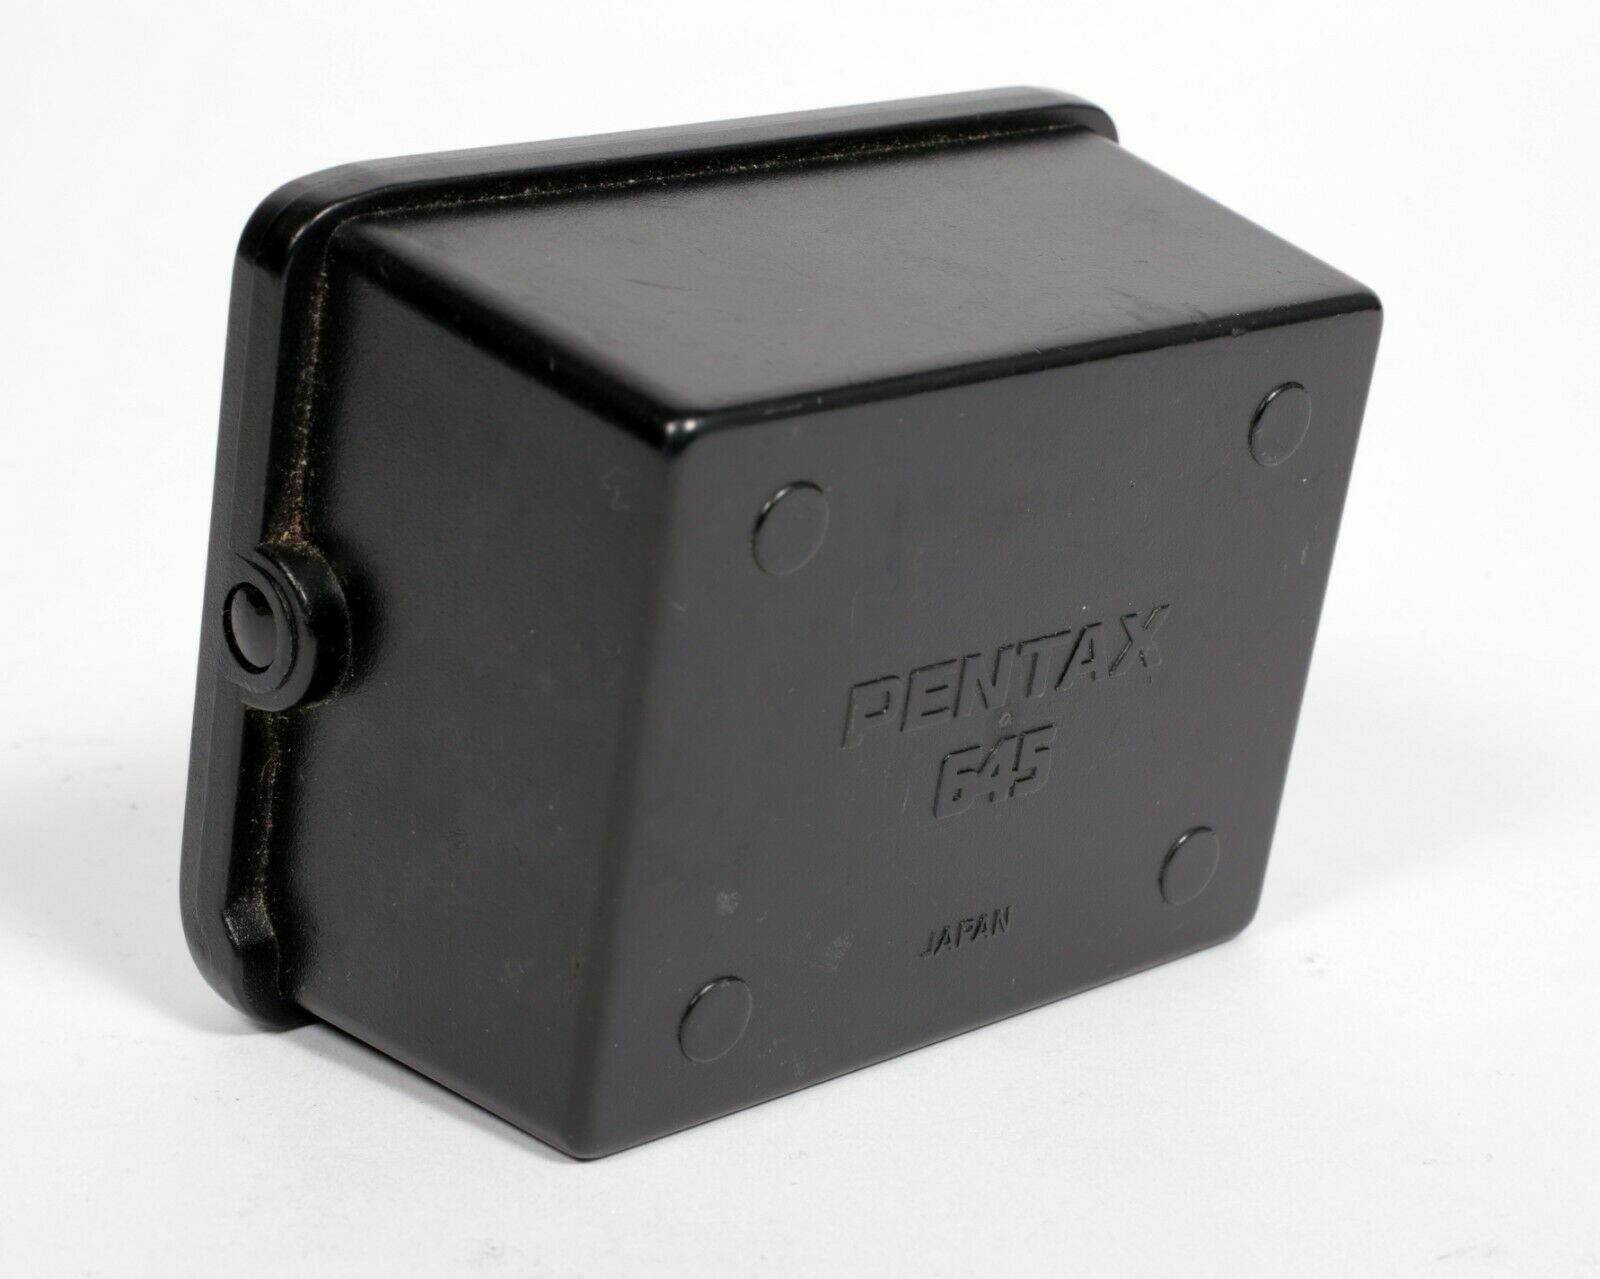 Pentax 645 6X4.5 120 back roll film holder insert with cover | CatLABS